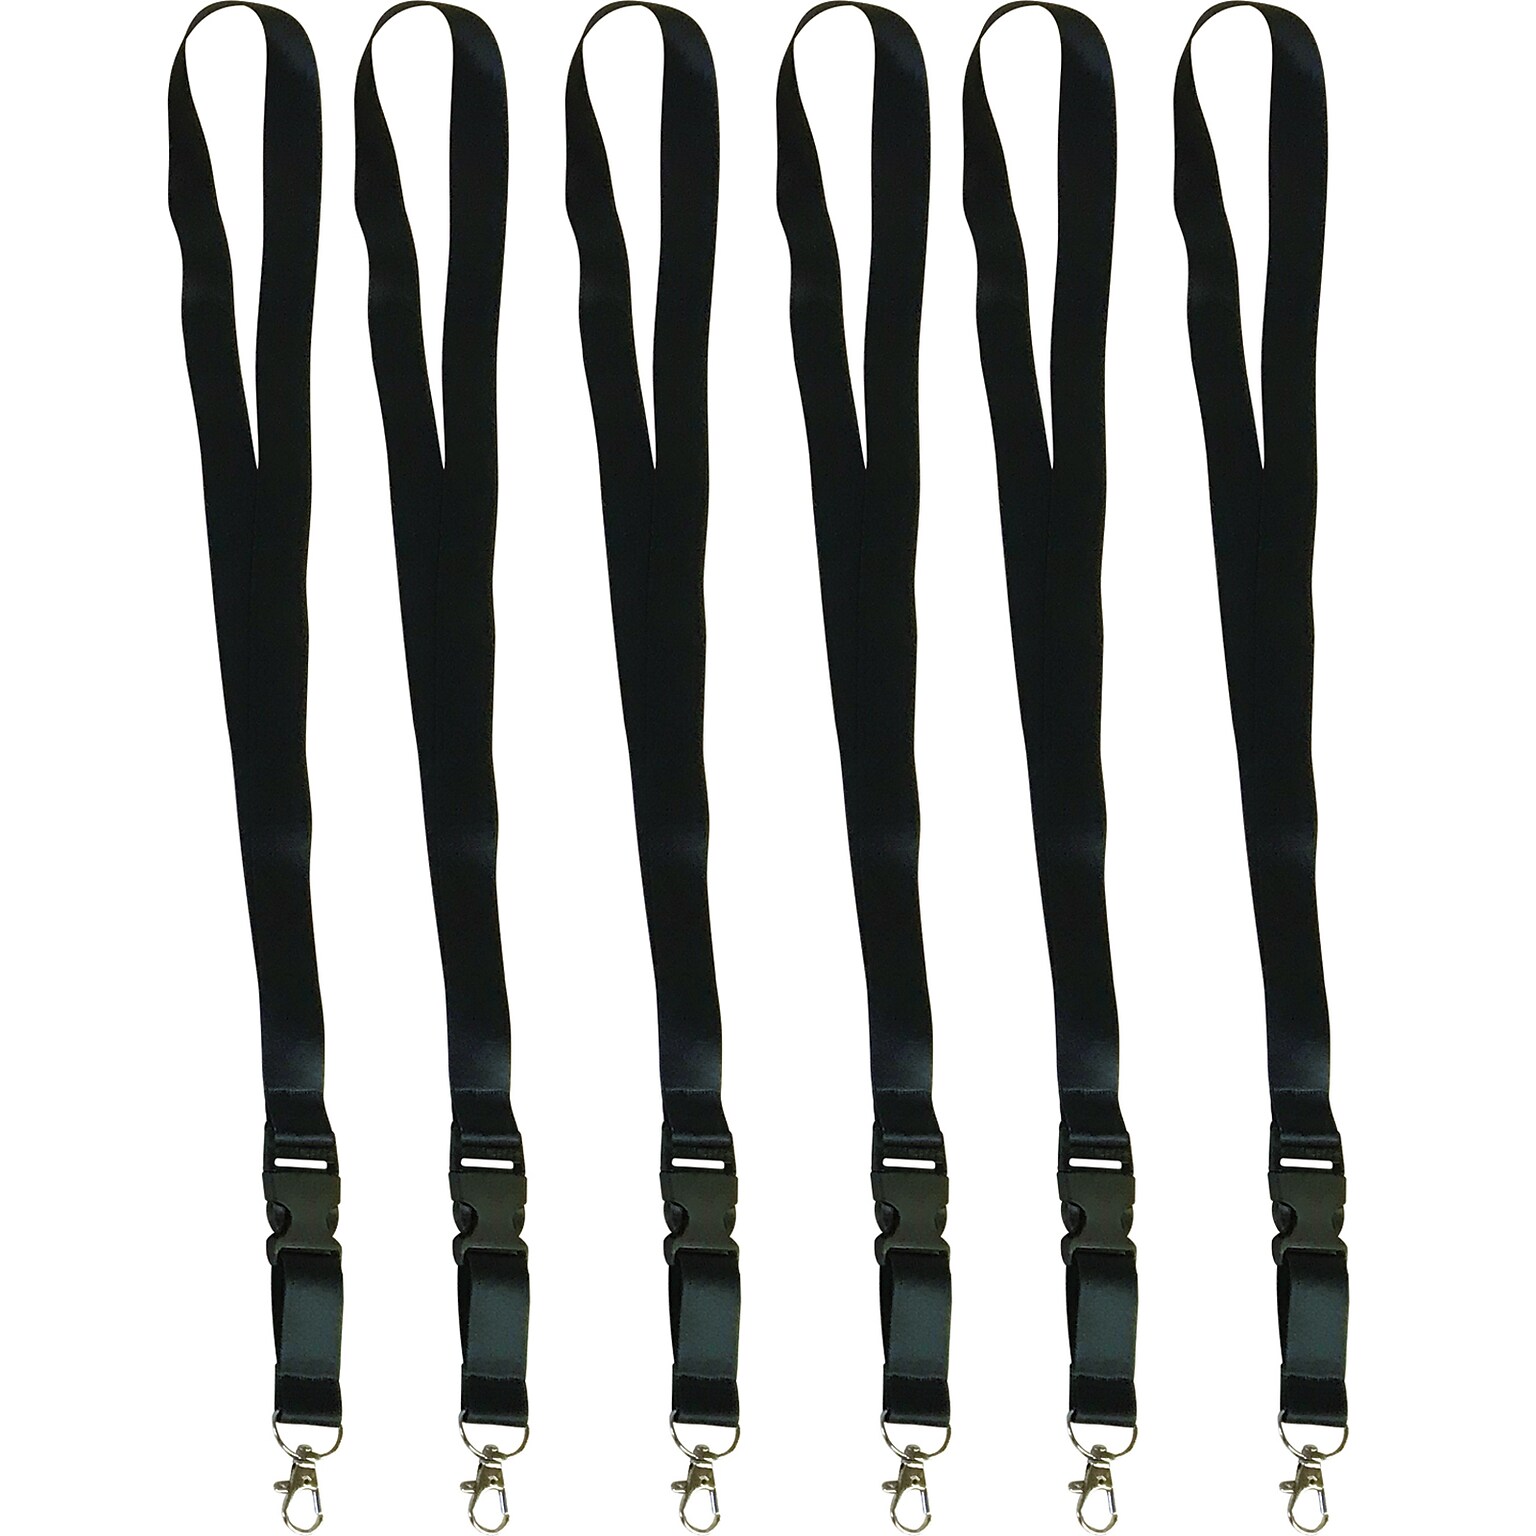 Teacher Created Resources Black Lanyard, 21.75 x 0.75, Pack of 6 (TCR20357-6)